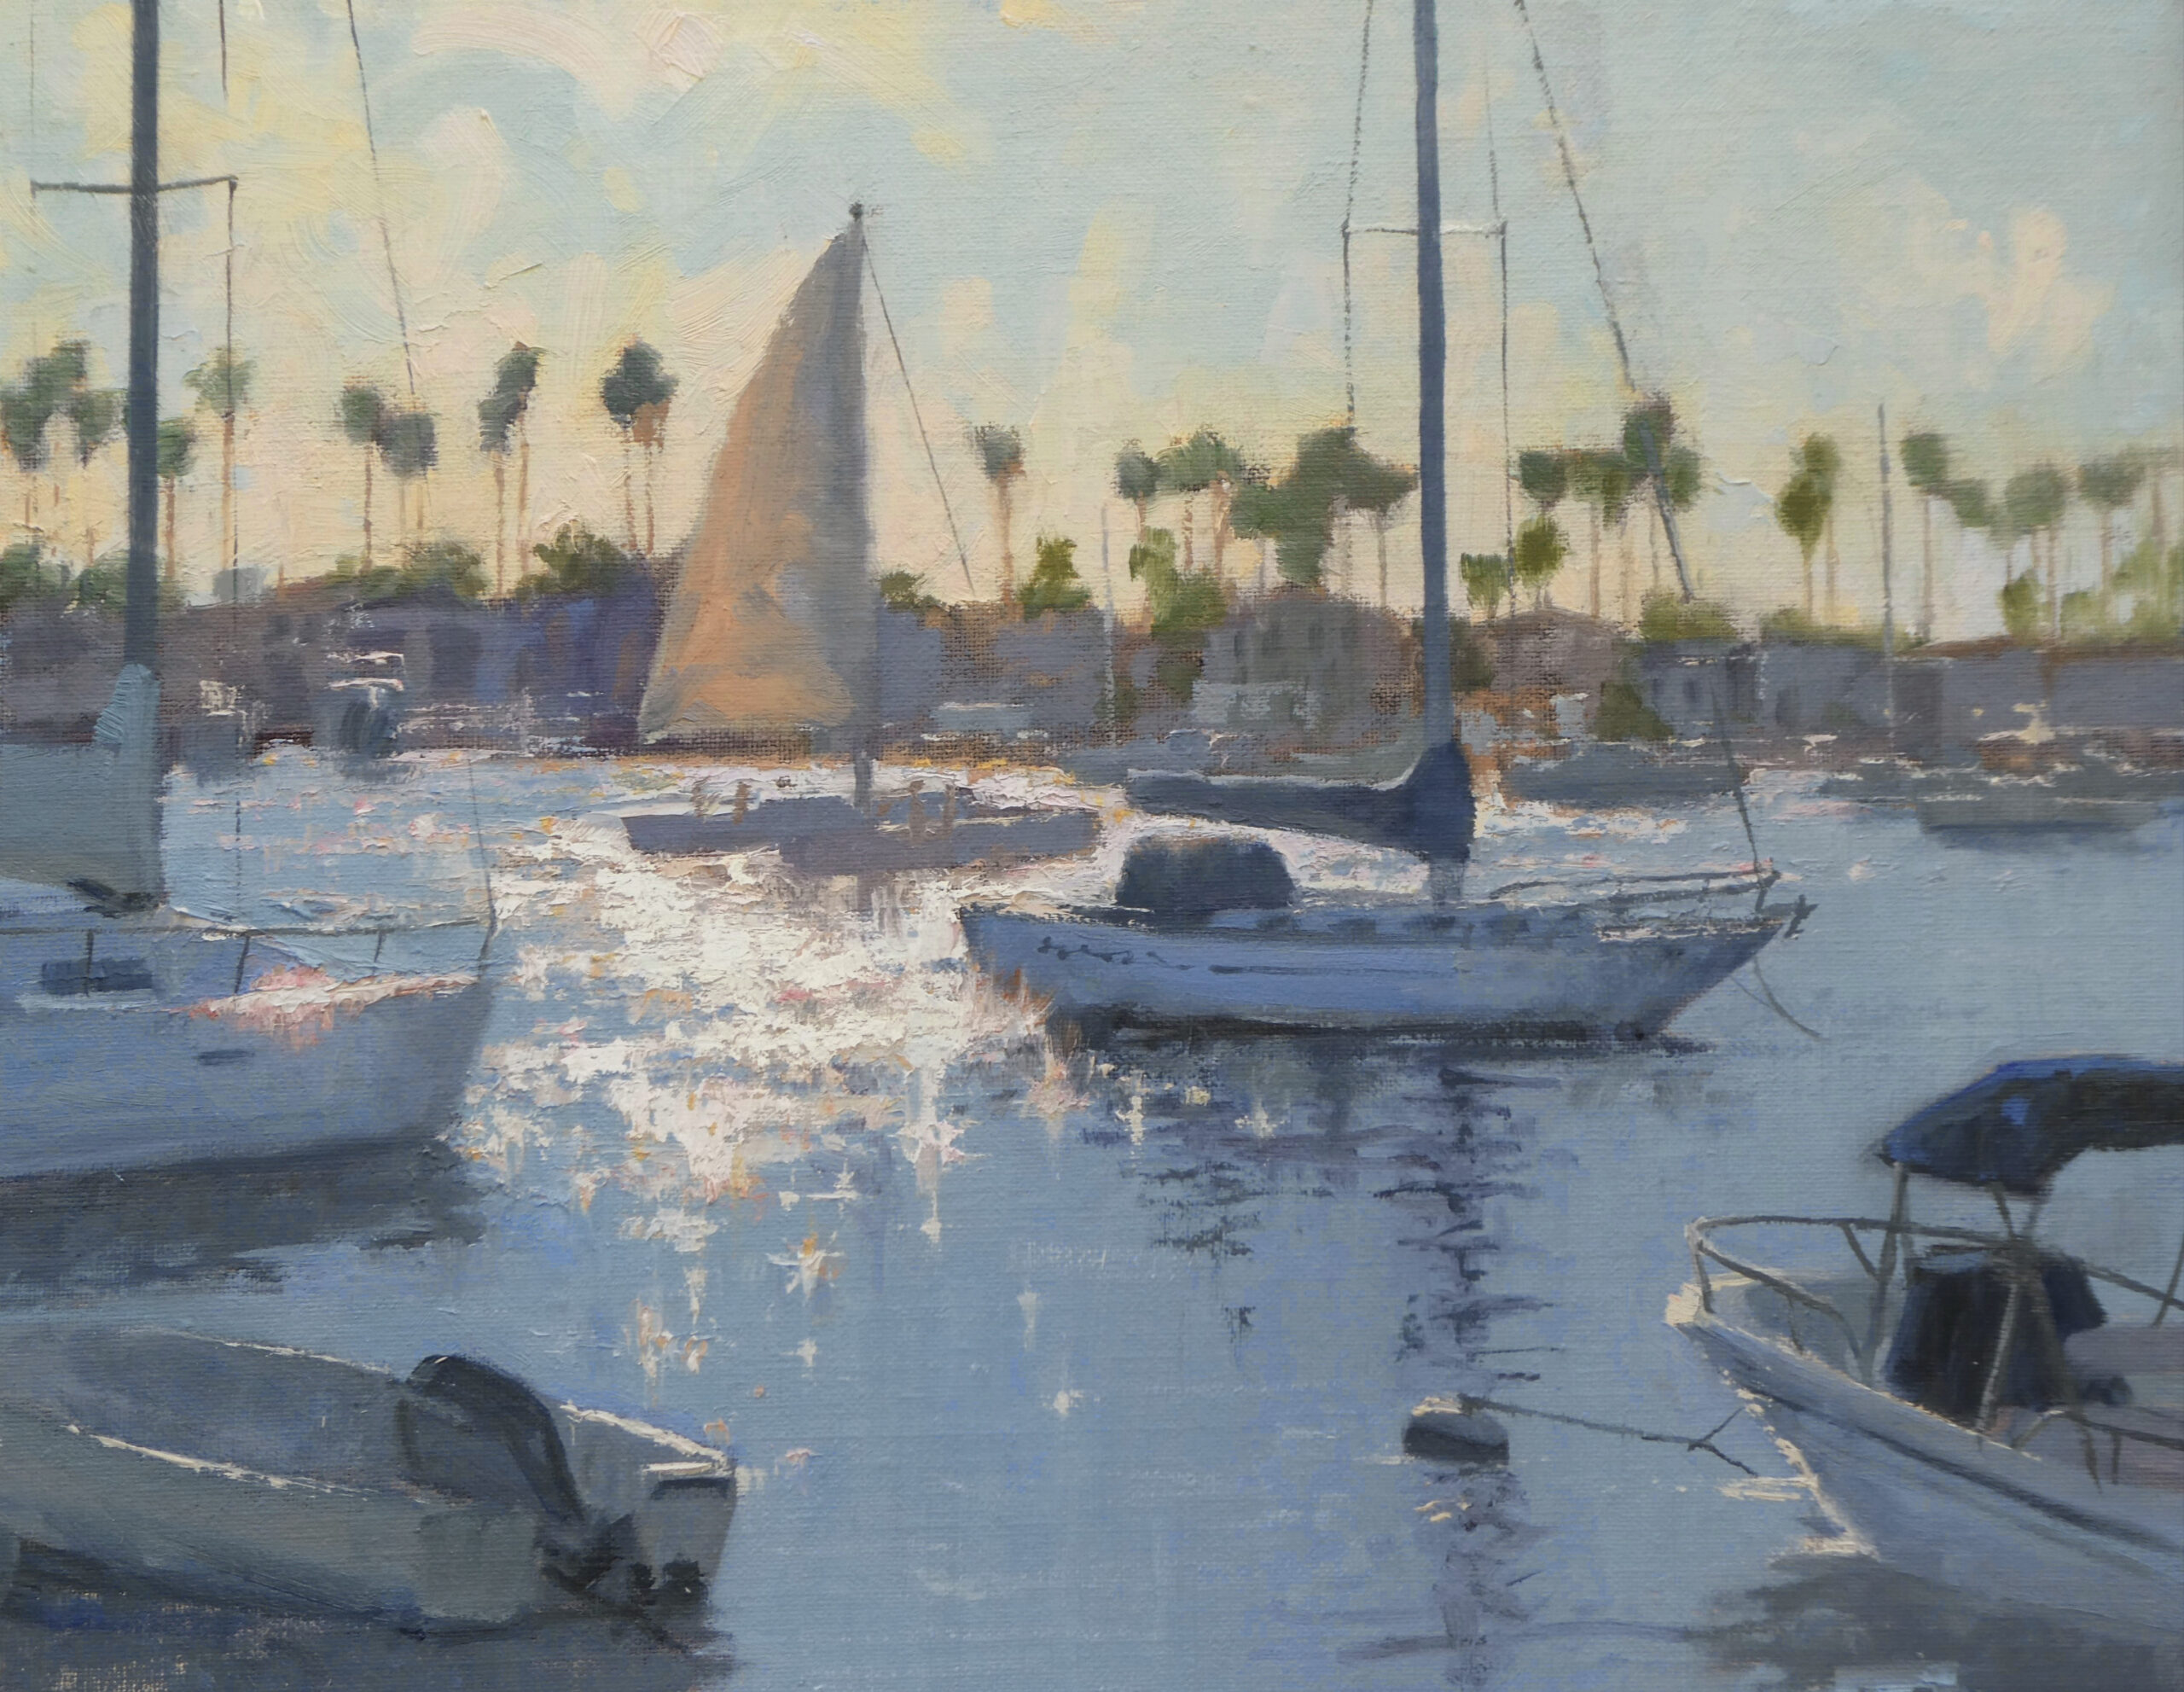 2. Sharon Weaver, “Afternoon Sparkle,” 2022, oil, 11 x 14 in., Private collection, Plein air and studio